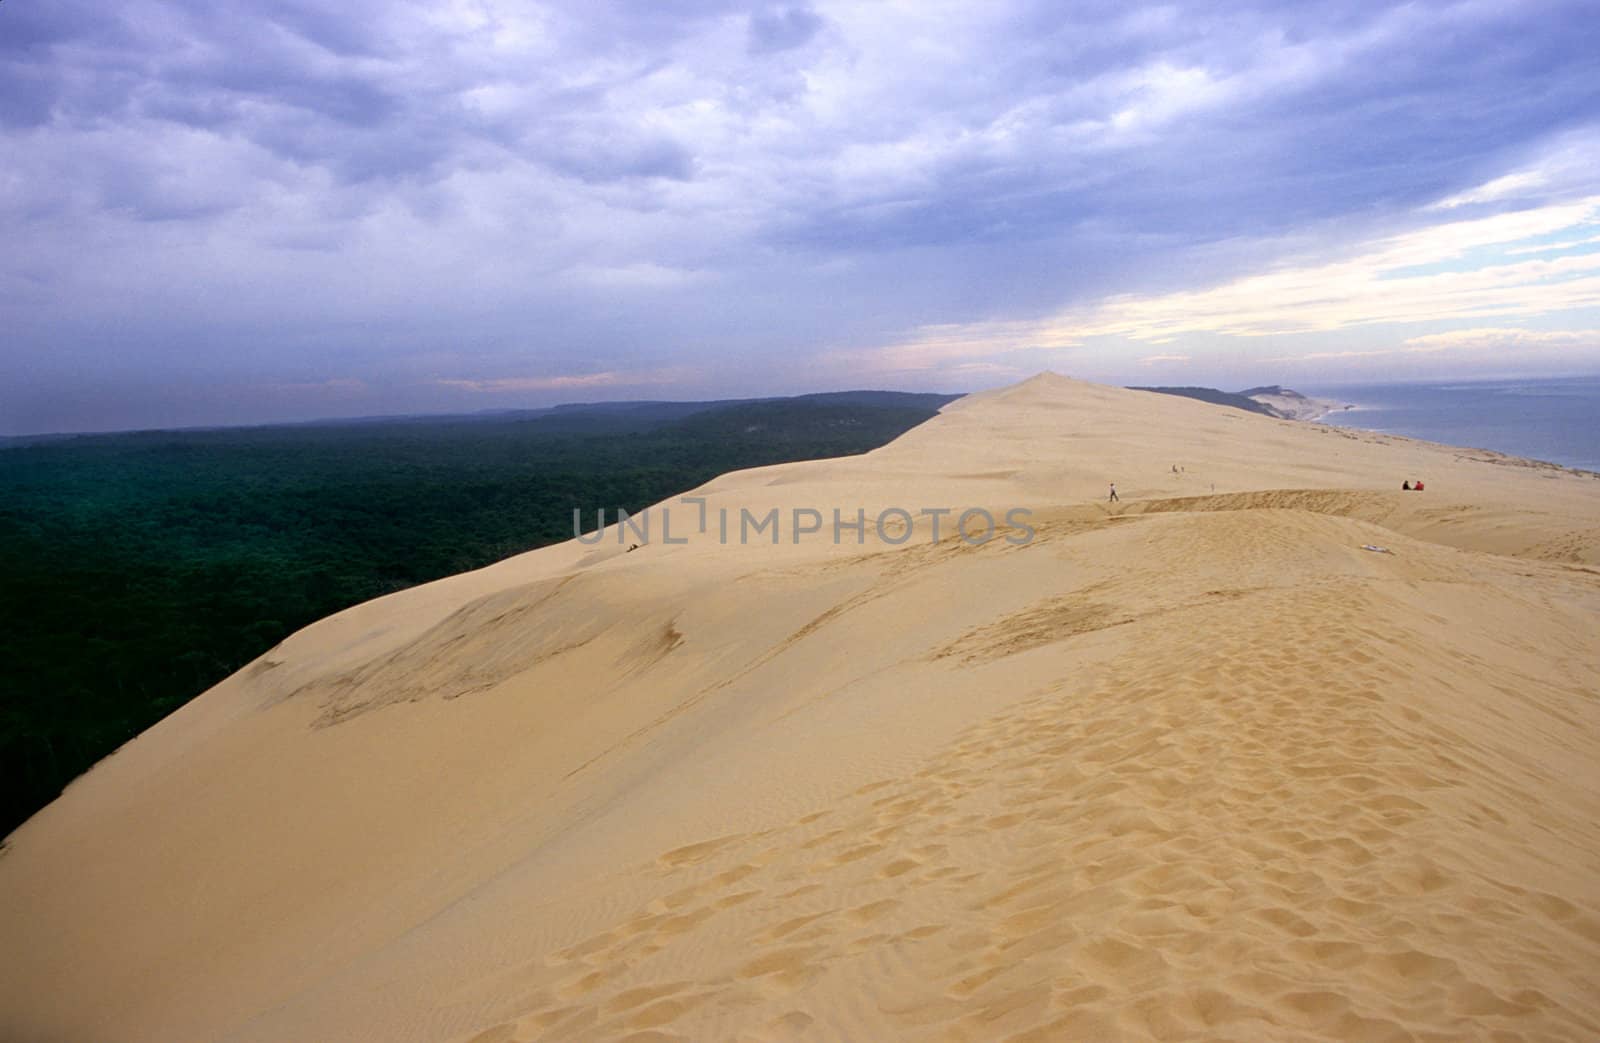 La Dune du Pyla is one of France's most unusual attractions. This man made sand due is the largest in Europe.